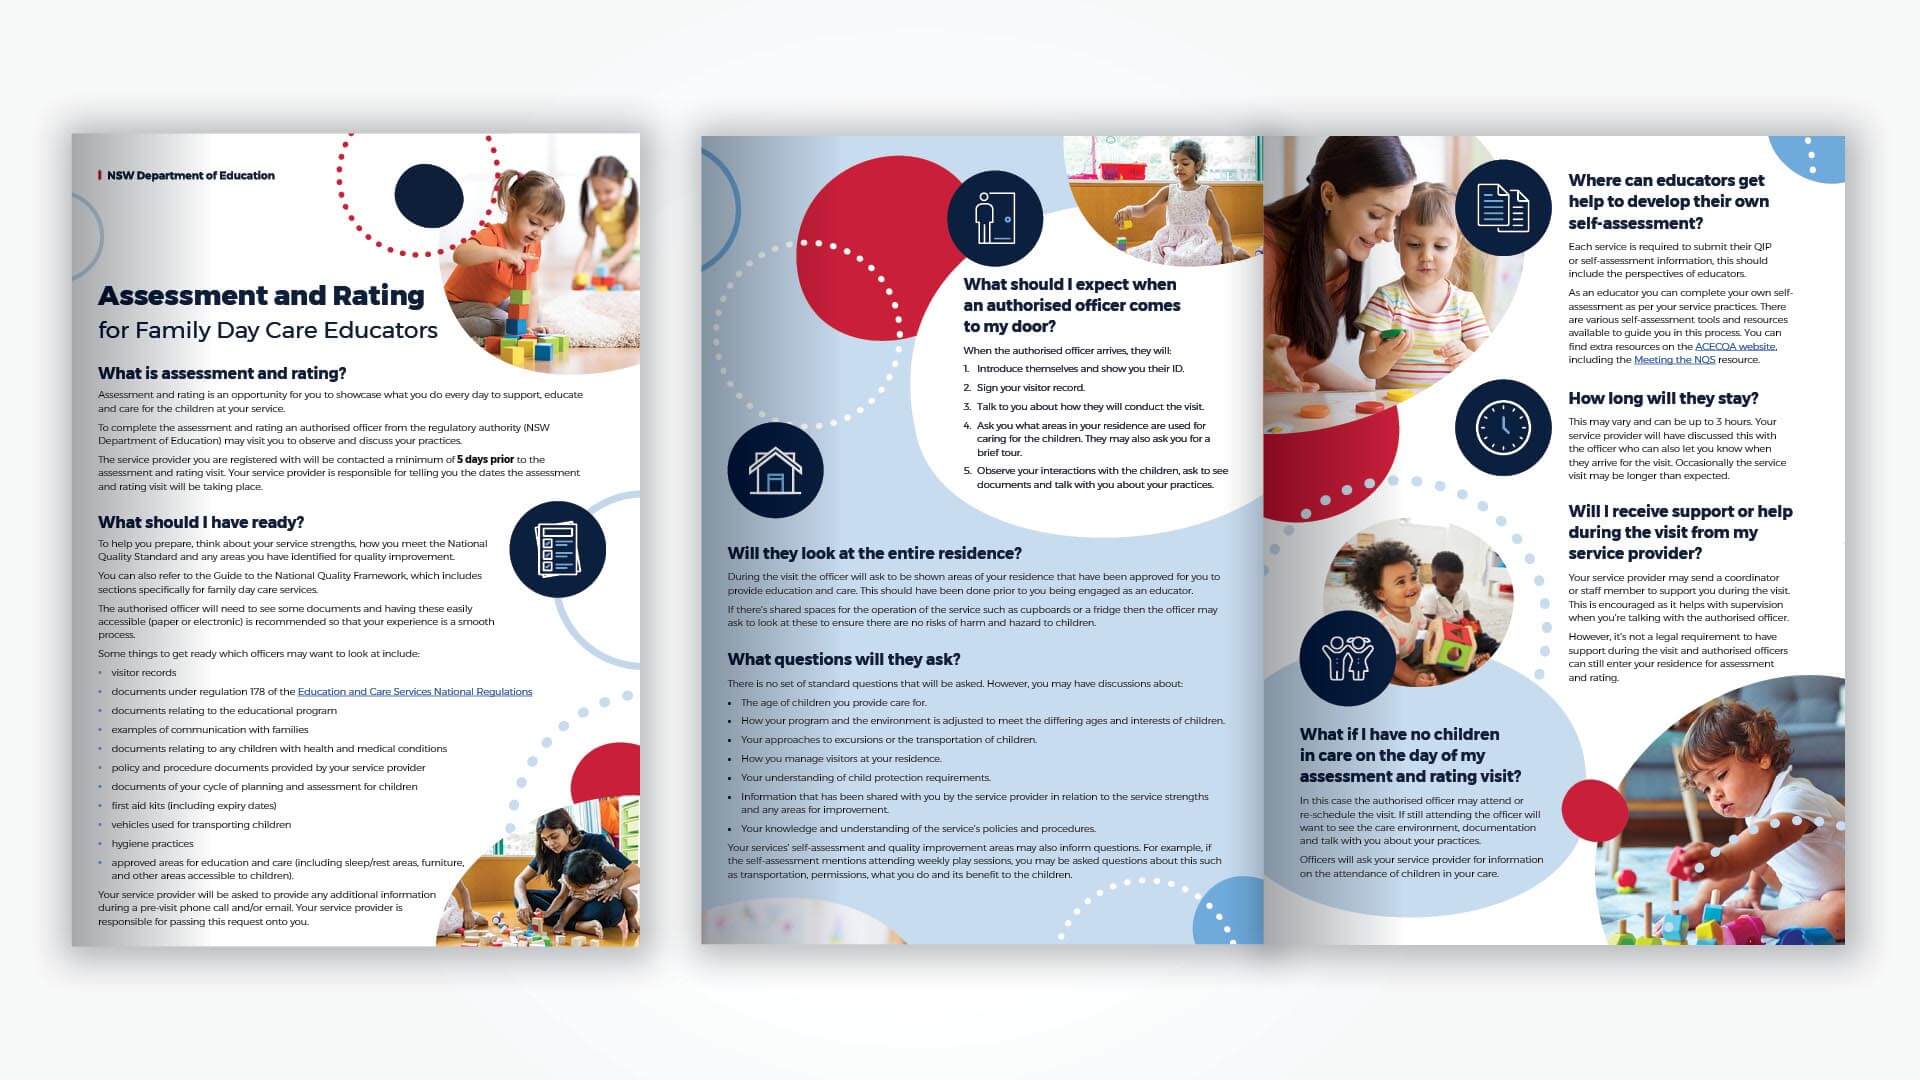 NSW Department of Early Childhood Education brochure design